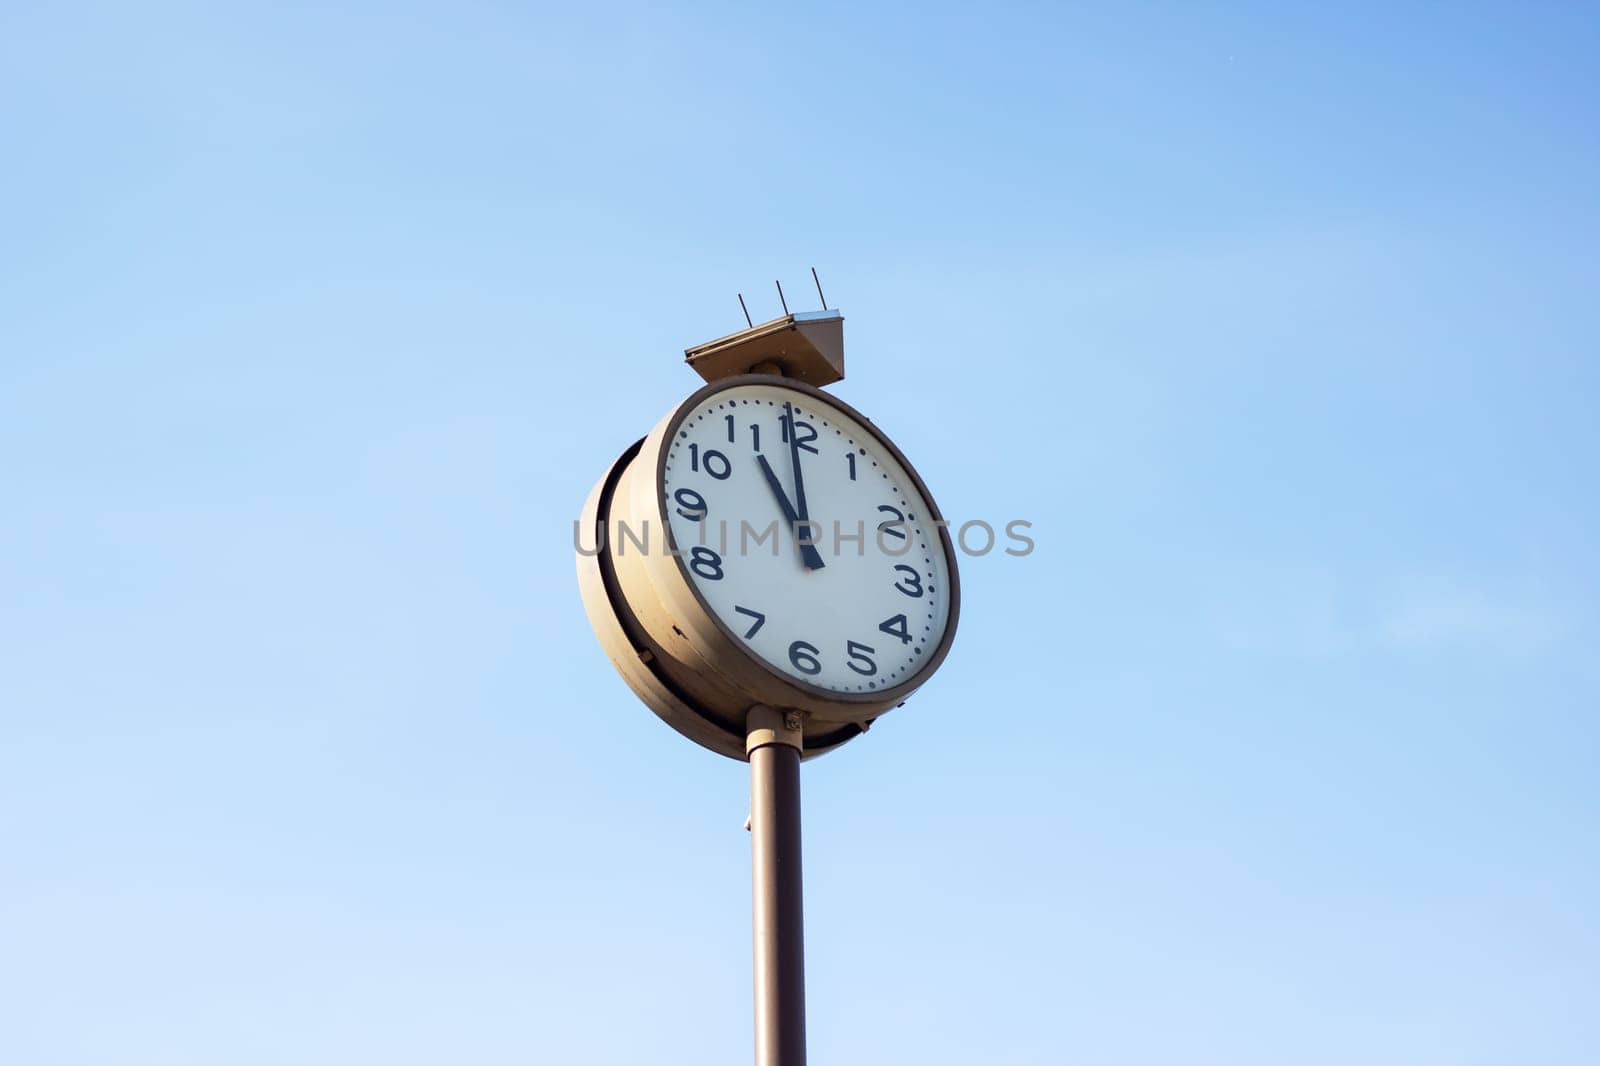 A quartz clock mounted on a metal pole displays the time as 1155 against a vibrant blue sky backdrop, adding a touch of elegance to the outdoor space